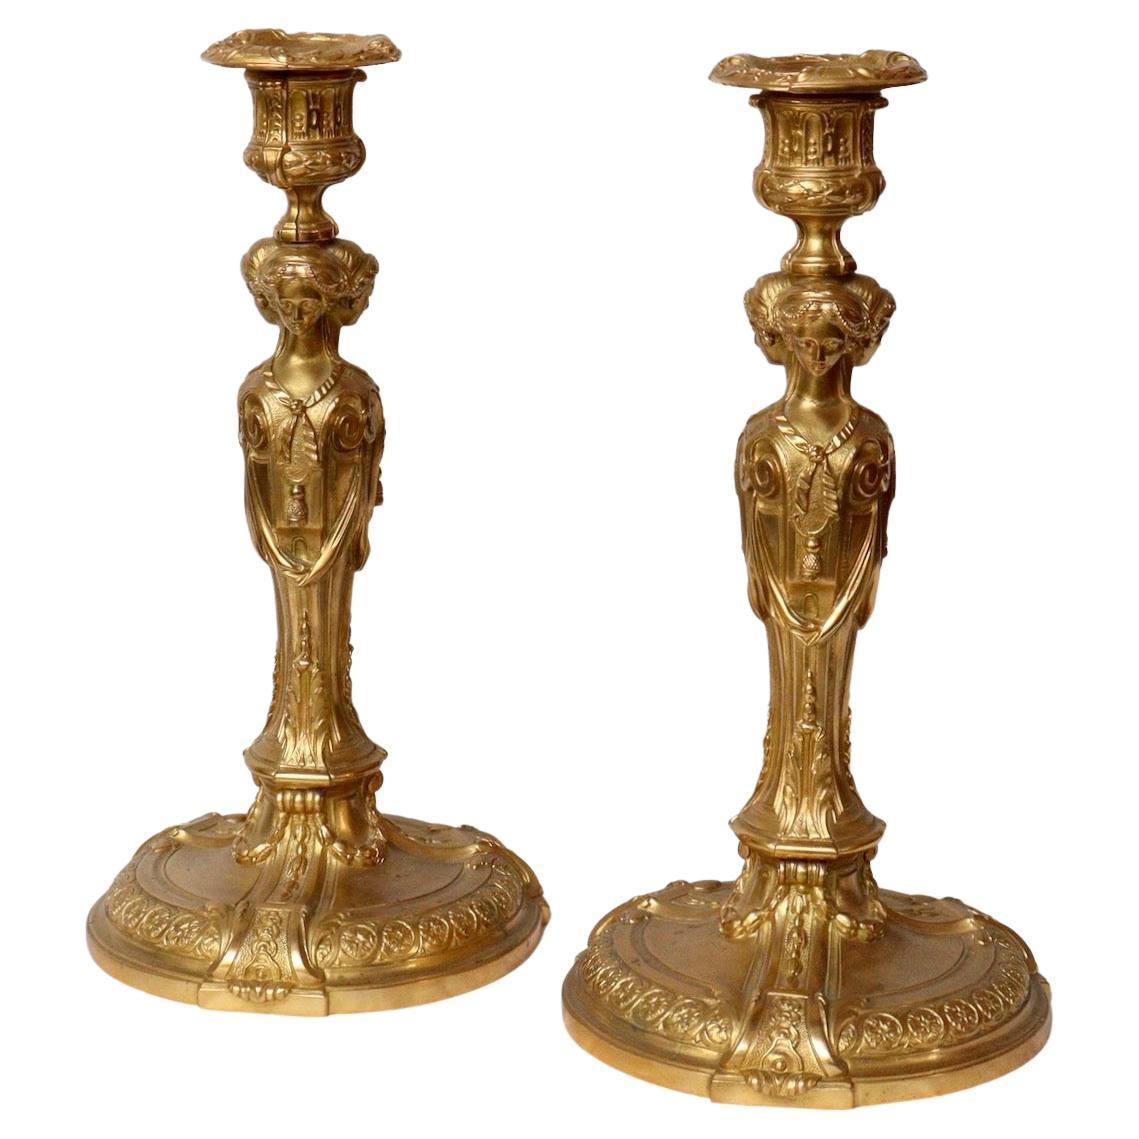 A Pair of Second Half 19th Century French Ormolu Candlesticks 
After the Model by Francois Rémond to a design By Jean-Demosthene Dugourc
Each with a stiff leaf decorated shaft modelled with four addorsed classically-dressed female herms and